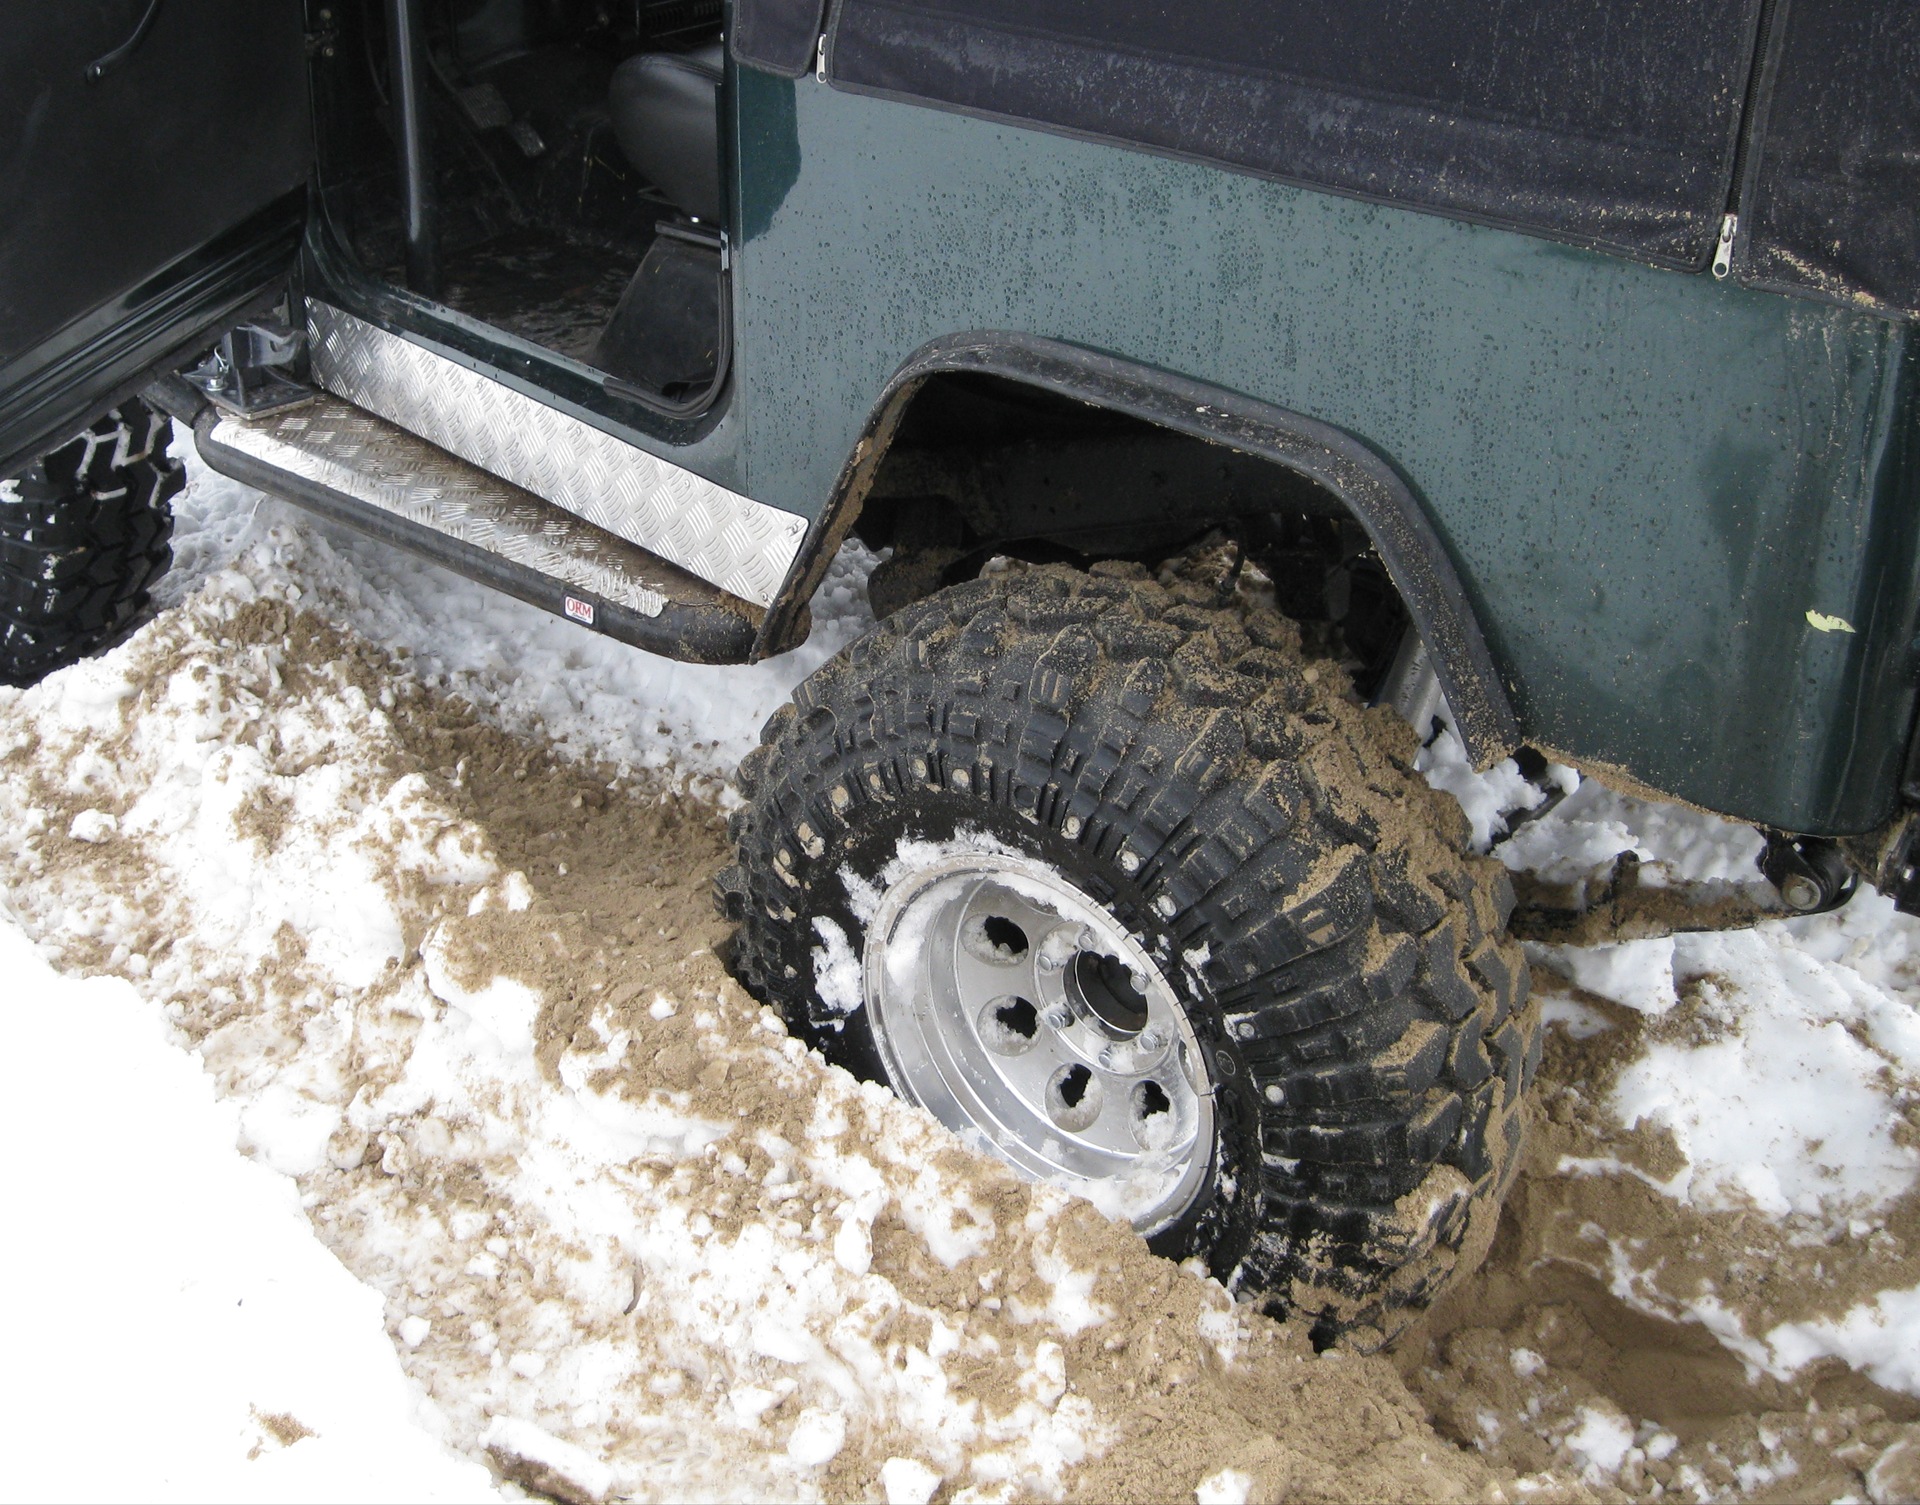 This is how the winter ride ended  - Toyota Land Cruiser 34 l 1983